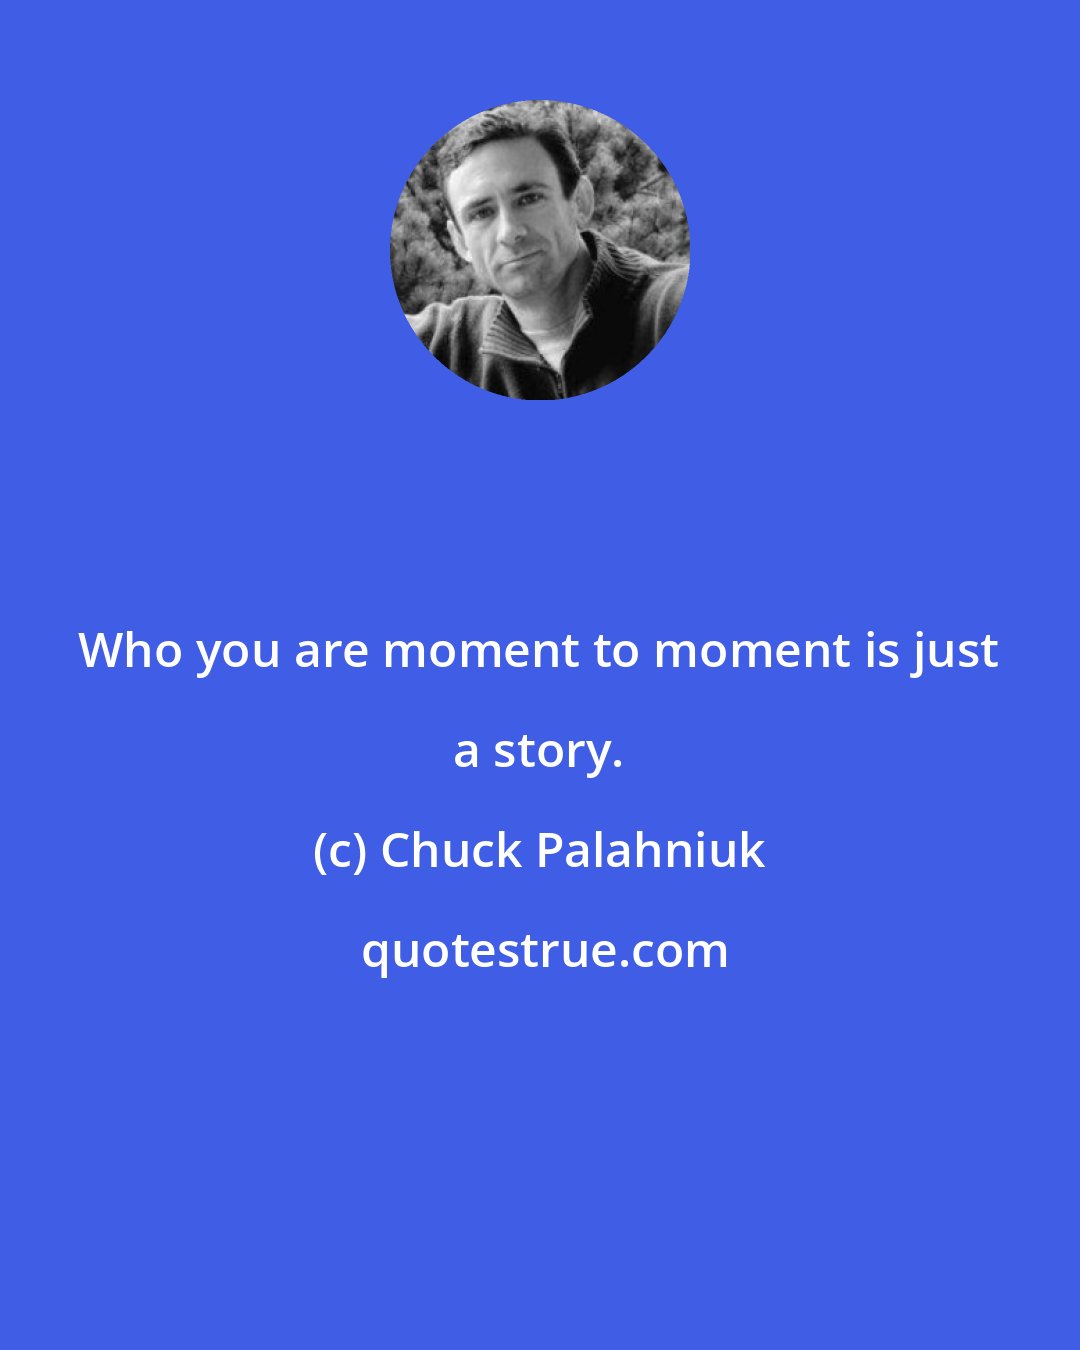 Chuck Palahniuk: Who you are moment to moment is just a story.